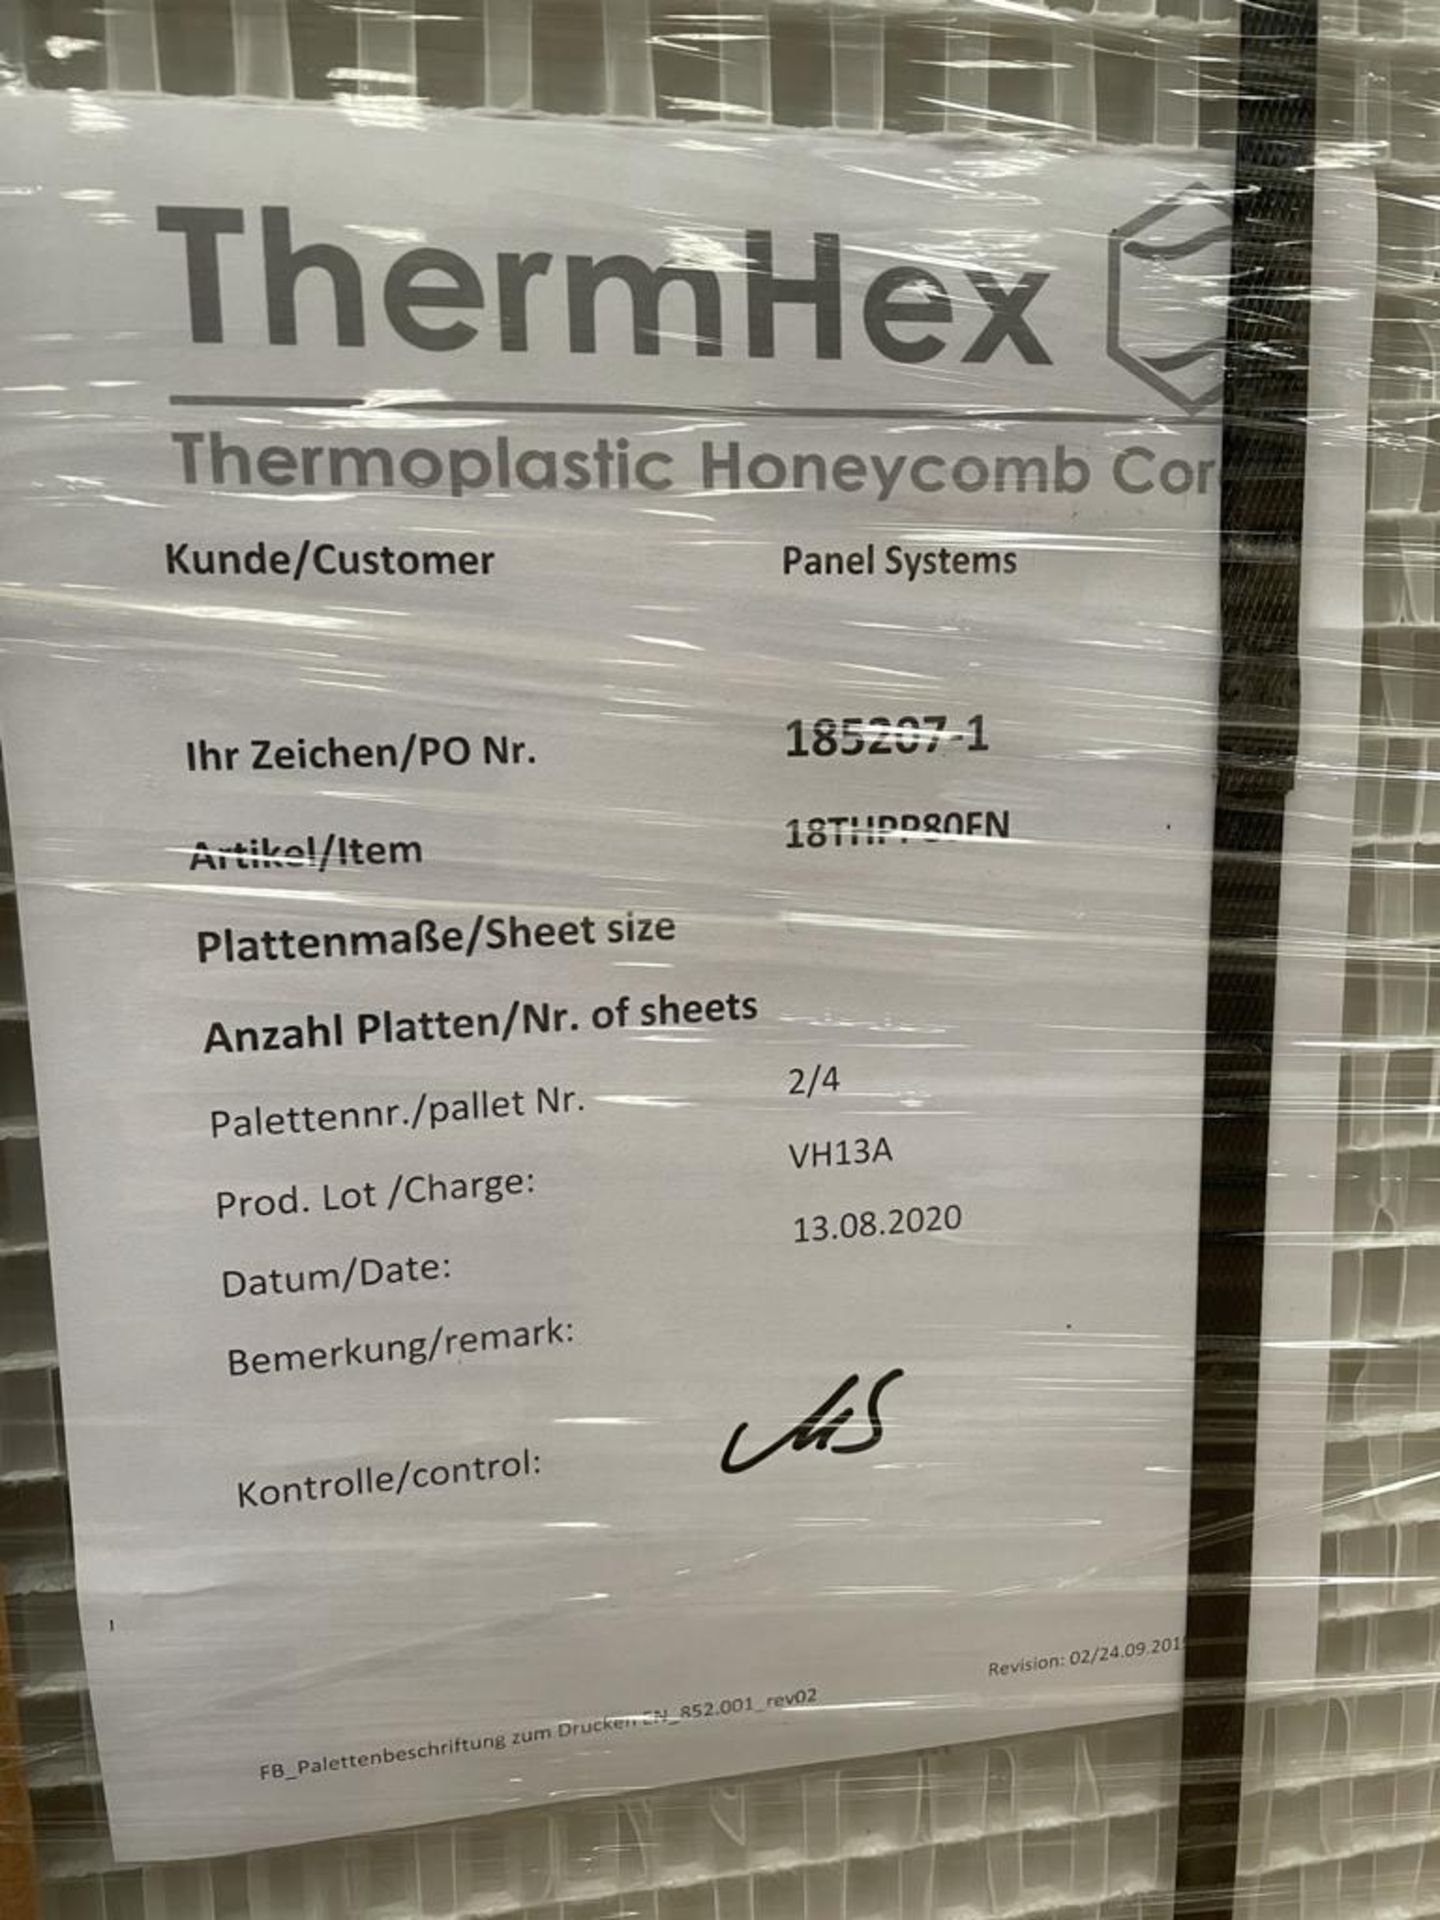 25 x ThermHex Thermoplastic Honeycomb Core Panels - Size 2630 x 1210 x 18mm - New Stock - - Image 5 of 8